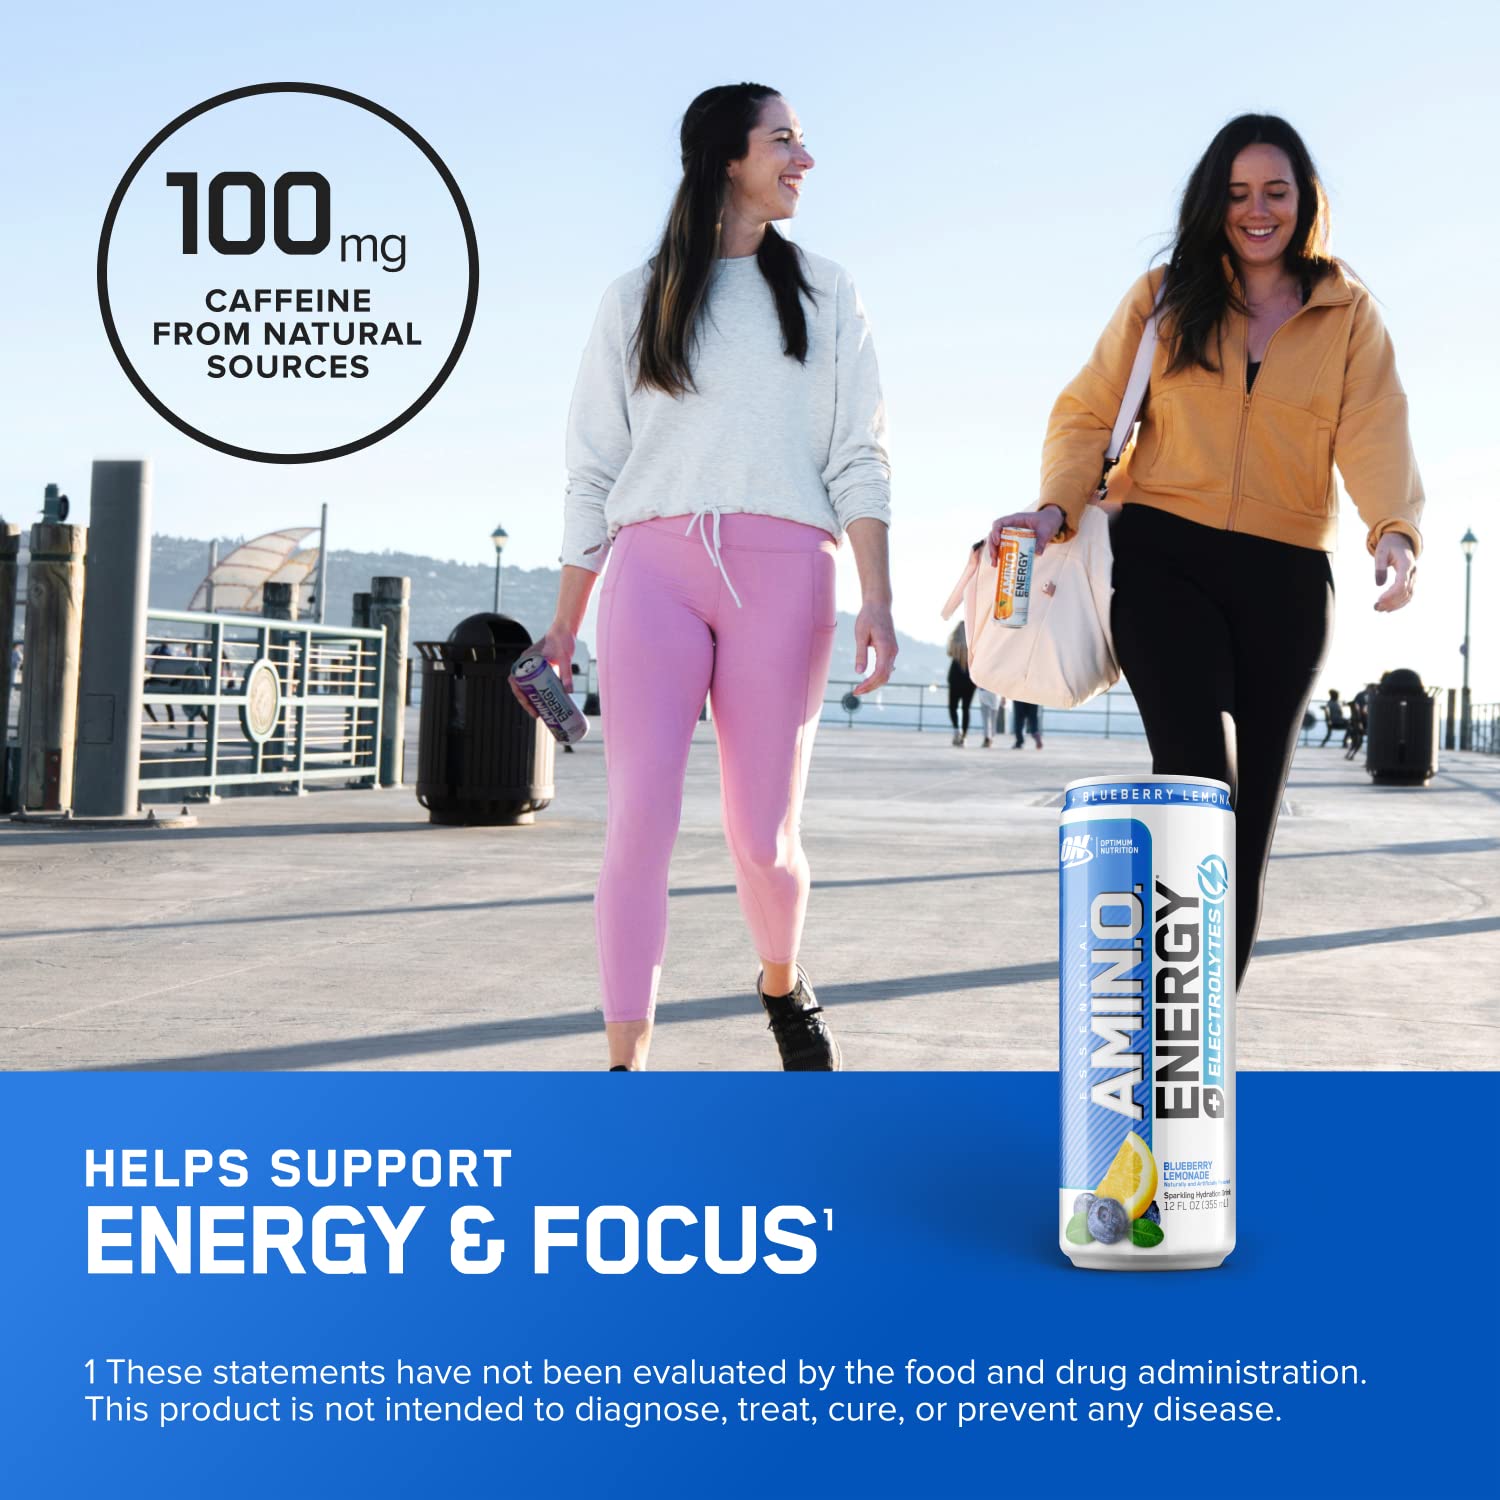 Optimum Nutrition Amino Energy Drink + Electrolytes for Hydration - Sugar Free, Amino Acids, BCAA, Keto Friendly, Sparkling Drink - Blueberry Lemonade, Pack of 12 (Packaging May Vary)